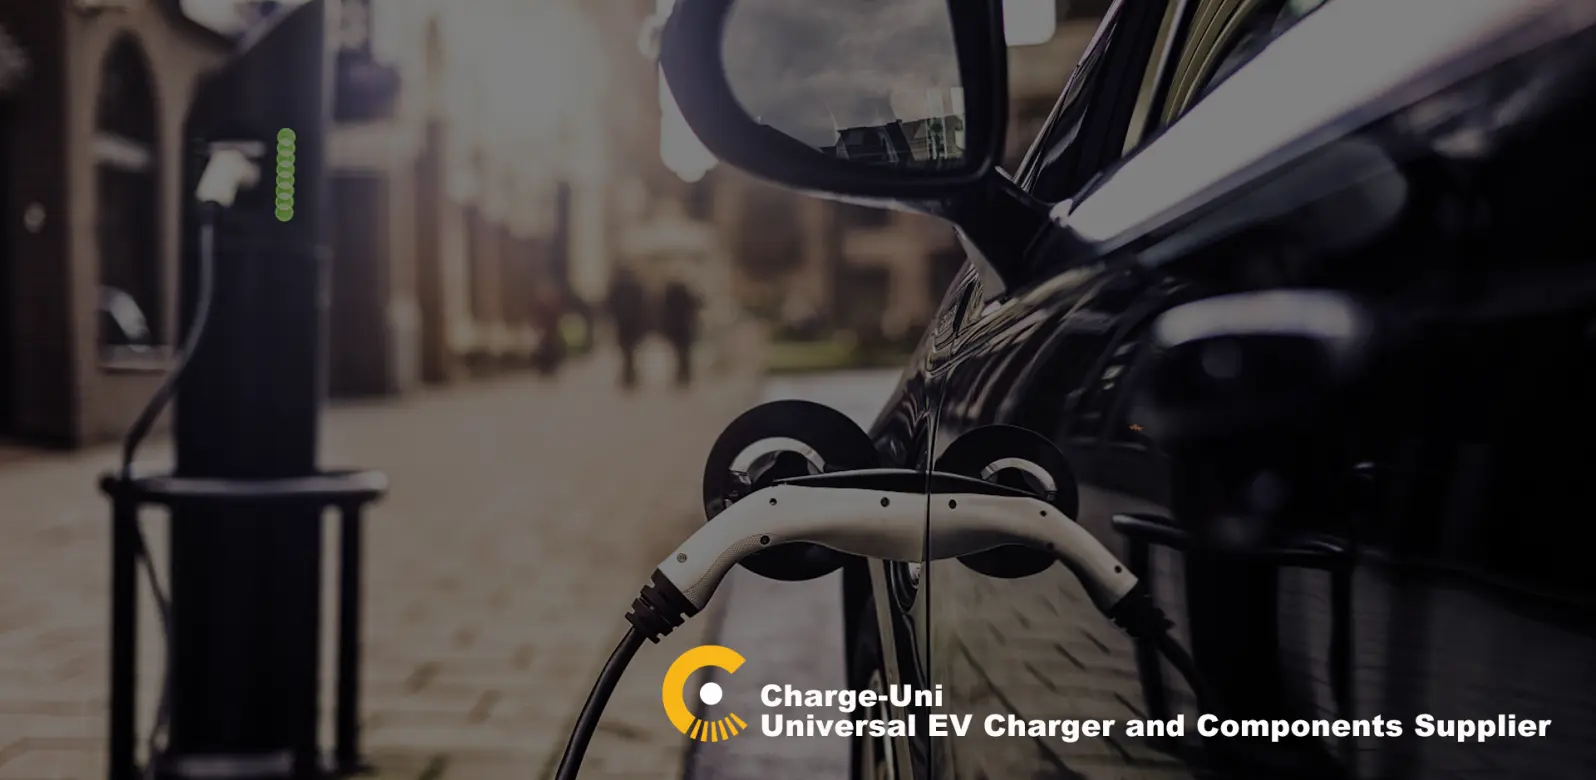 CHARGE-UNI EV Charger Applications